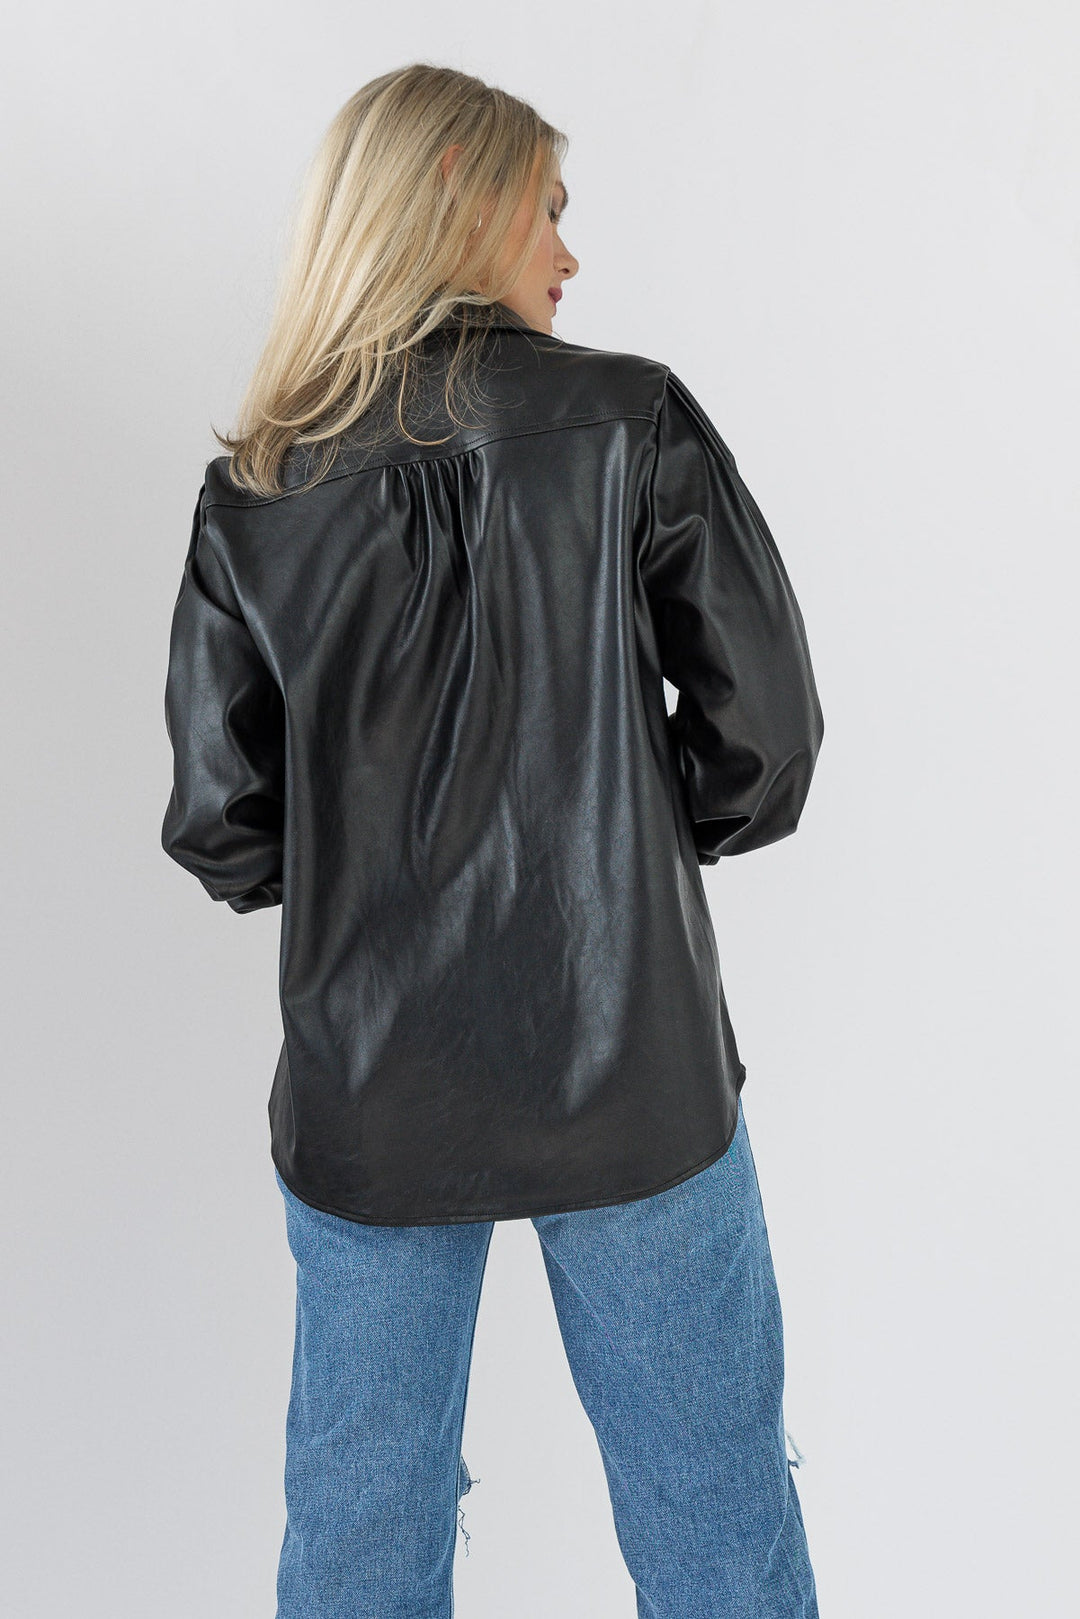 Faux Real Faux Leather Top - Black - JO+CO